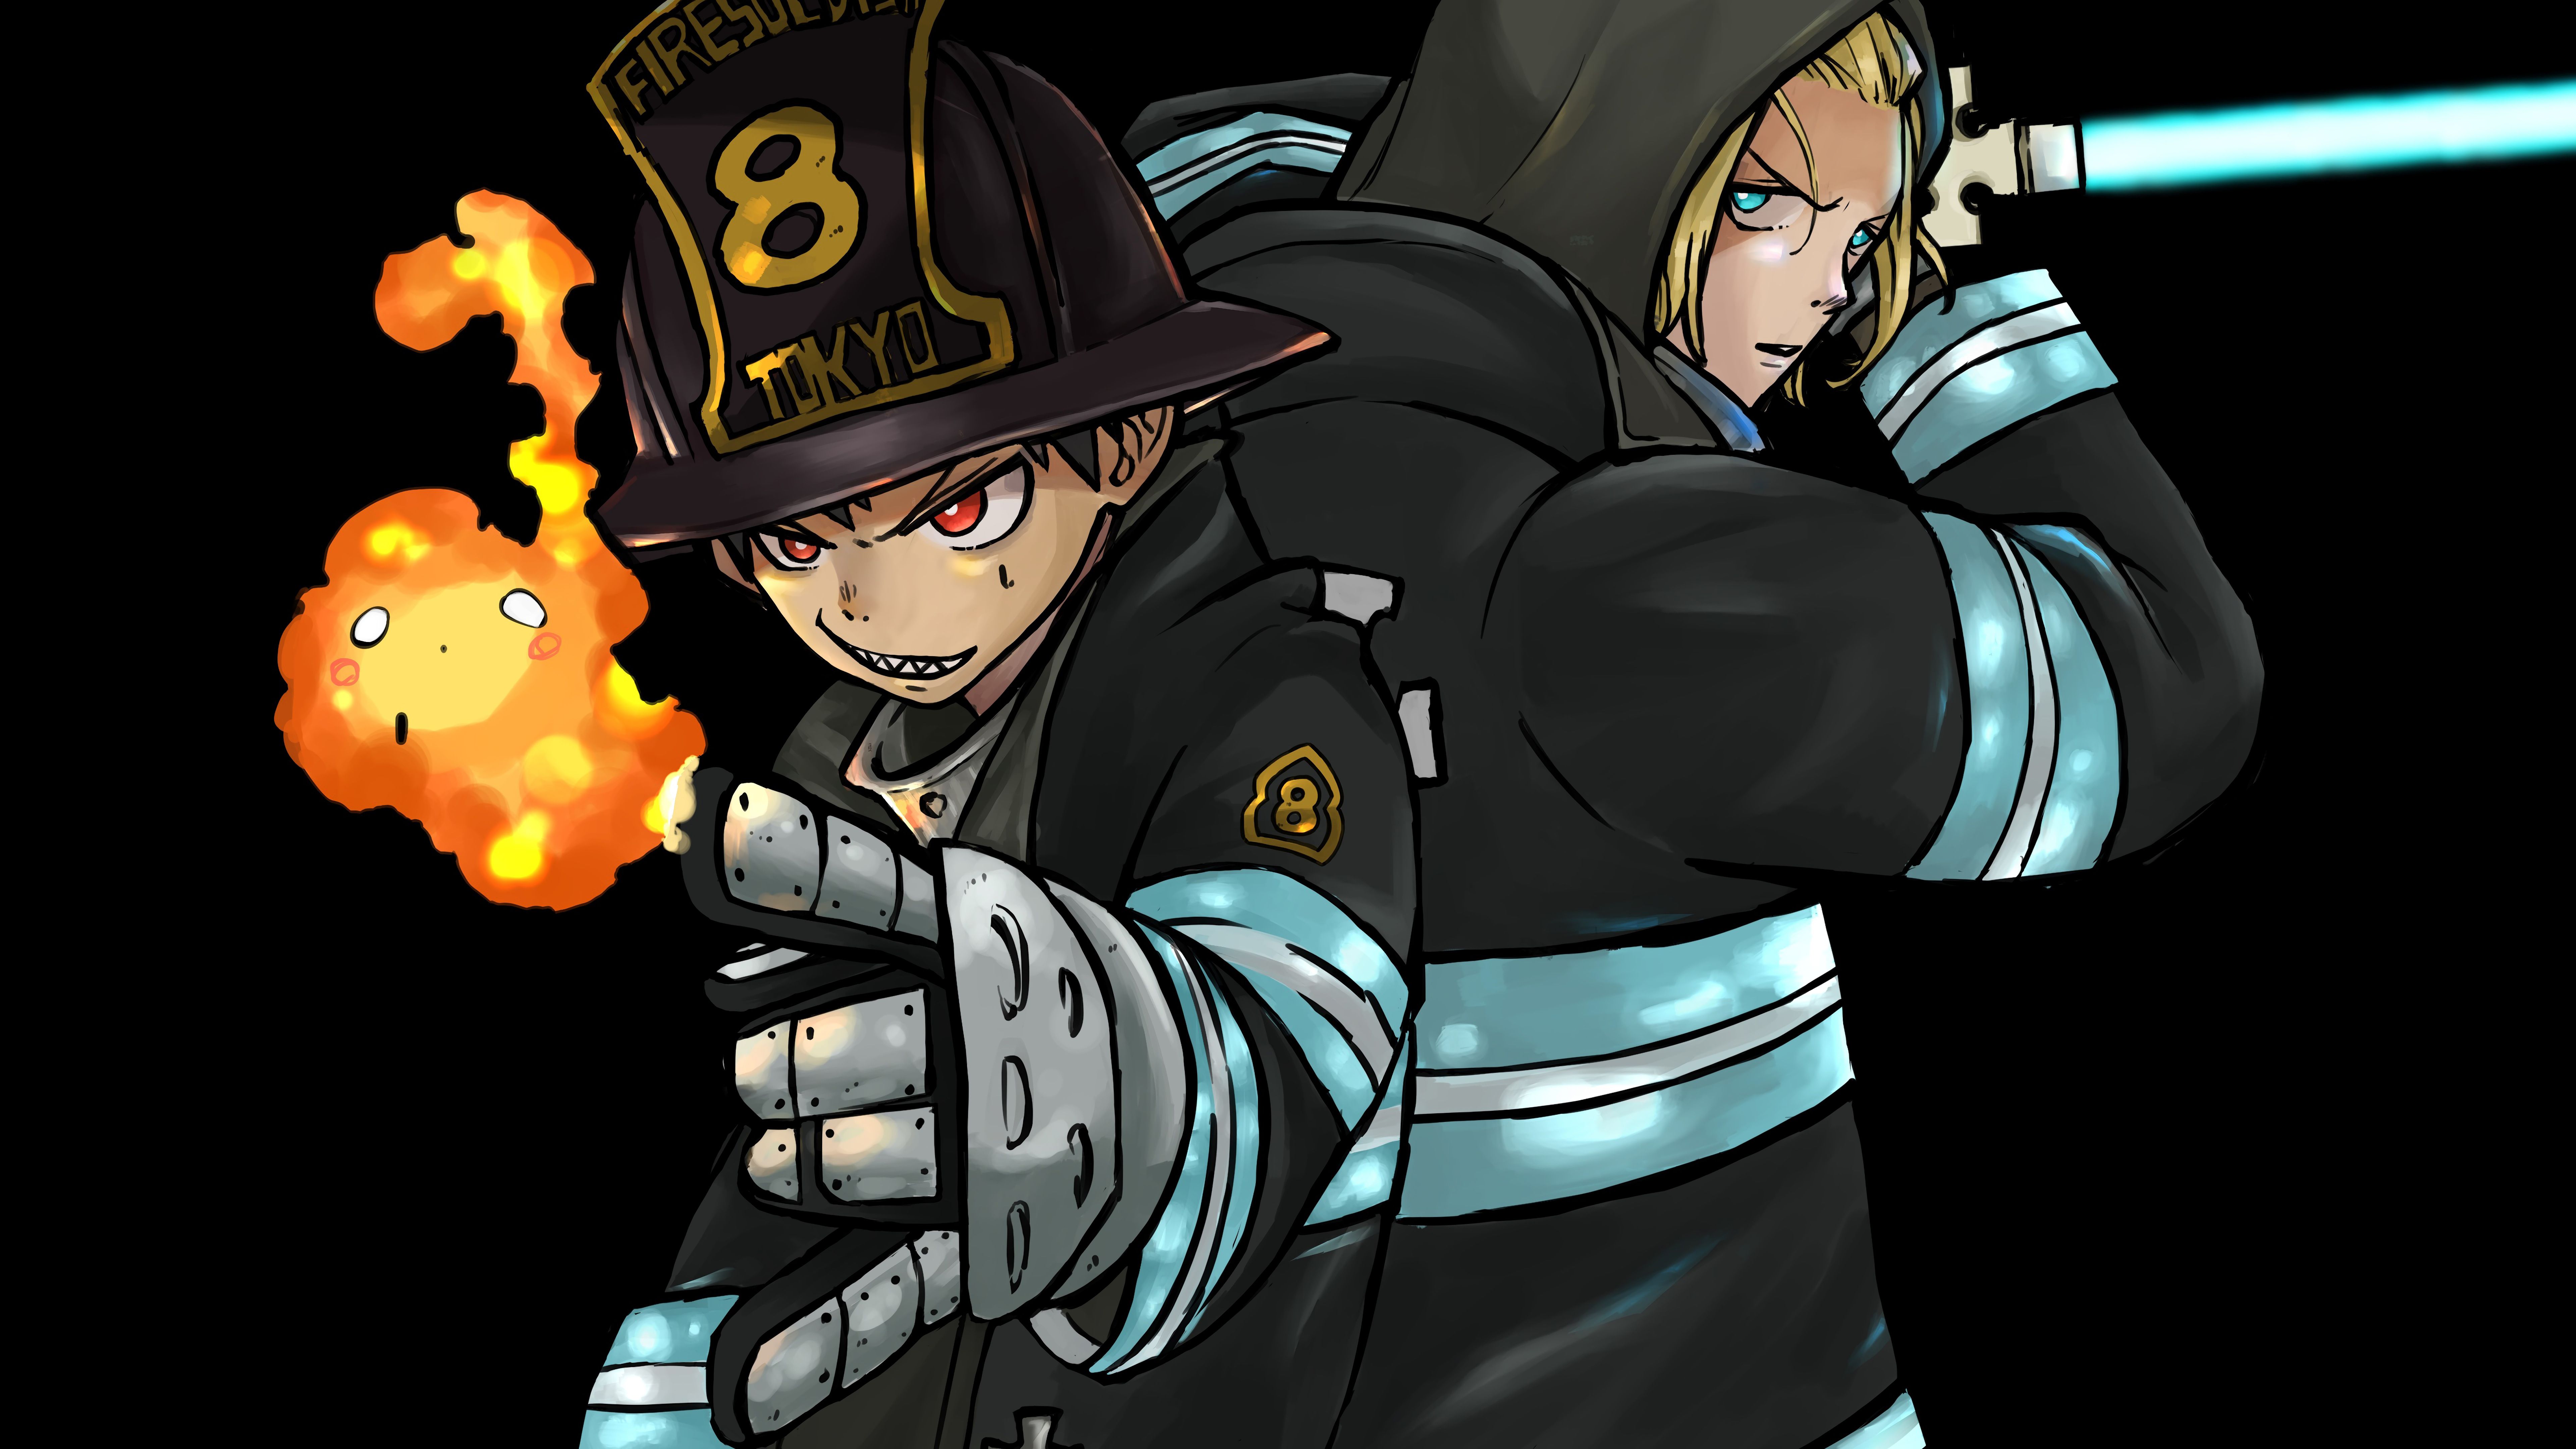 Fire Force Shinra Wallpapers 4k Hd Fire Force Shinra Backgrounds On Wallpaperbat